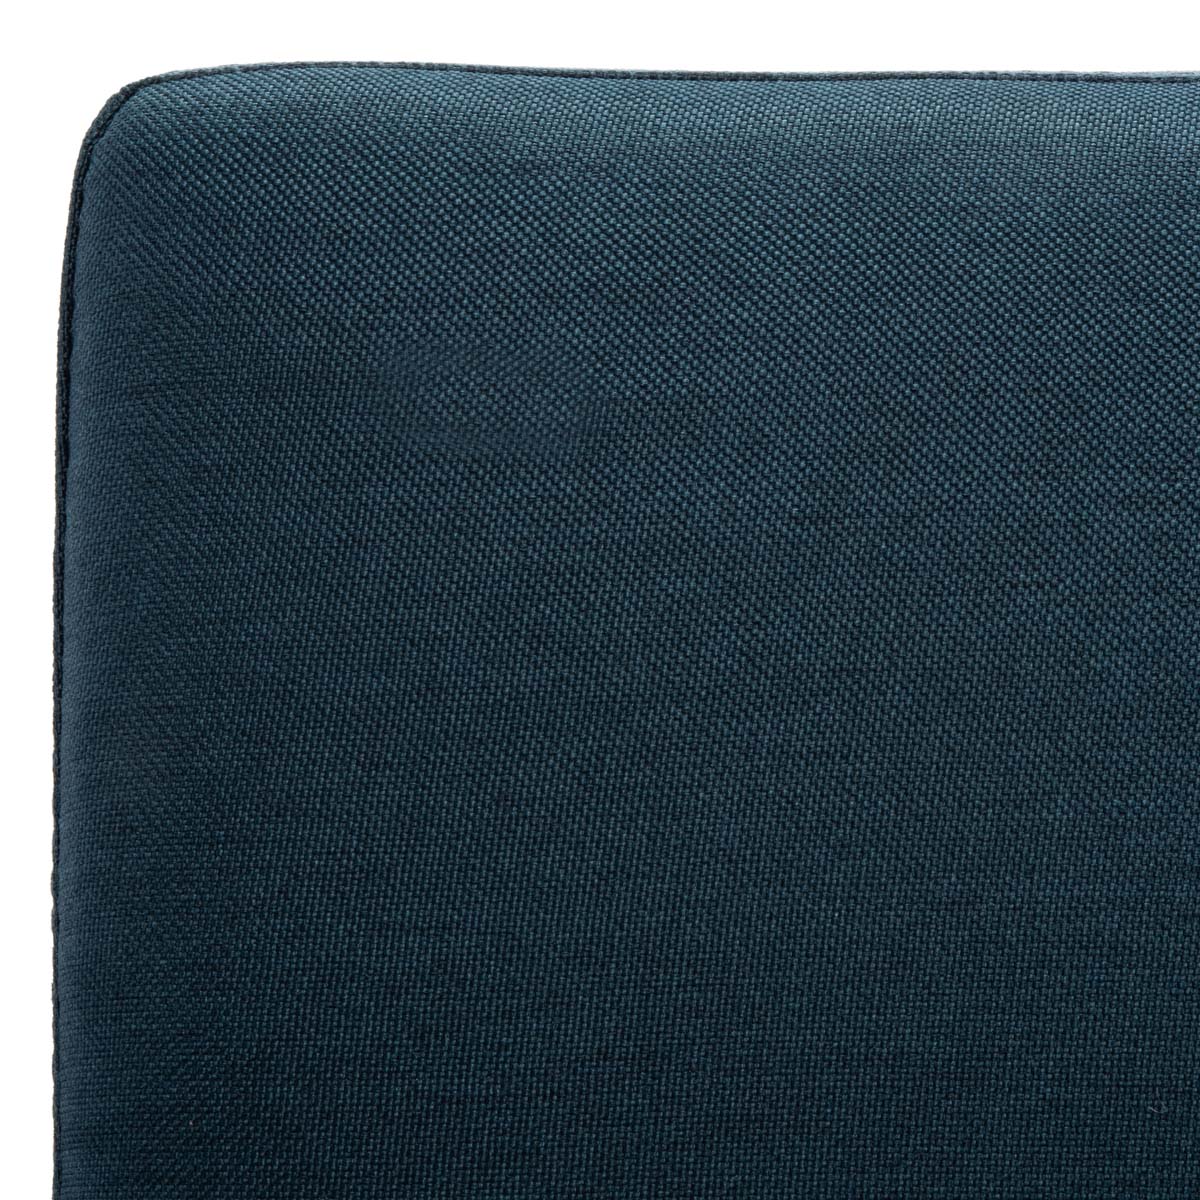 Safavieh Murray Foldable Futon Bed With Pillow , LVS2004 - Navy / Natural